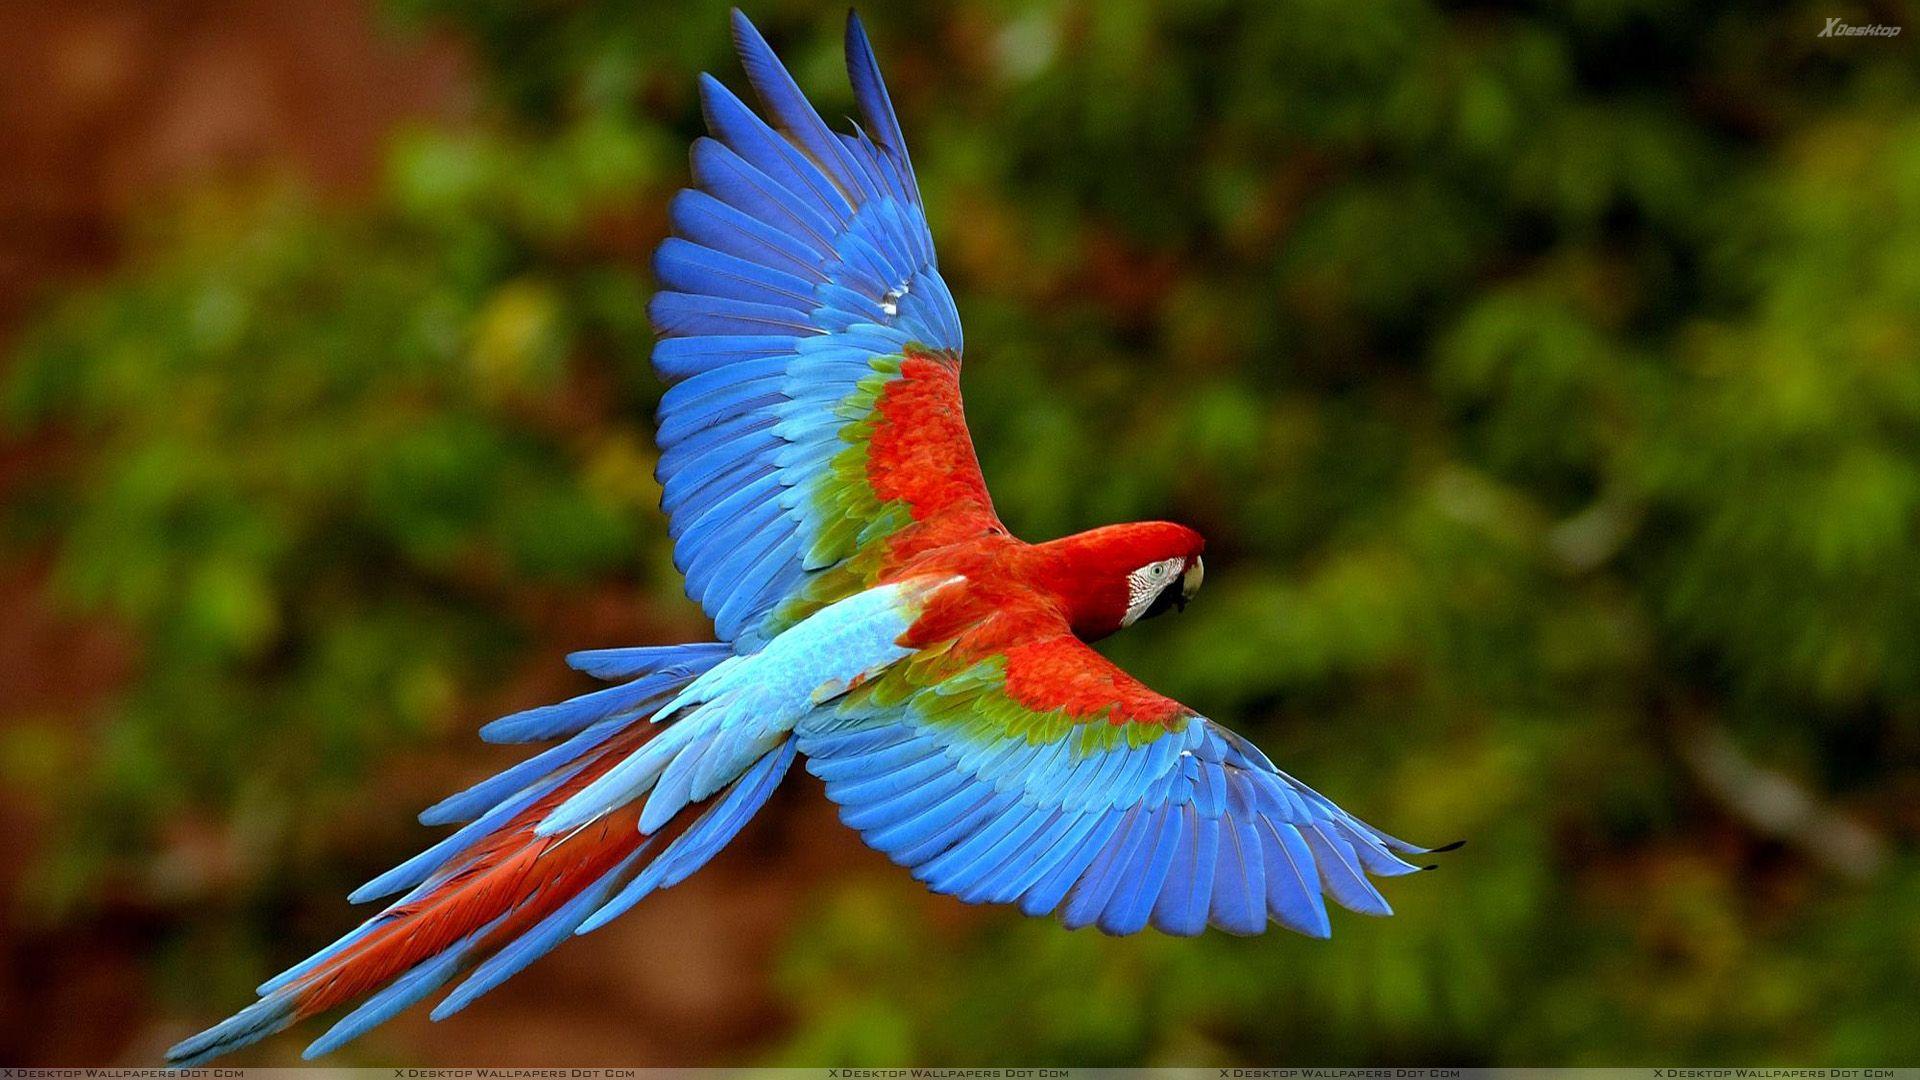 Beautiful Birds Flying In The Sky HD Wallpaper, Background Image